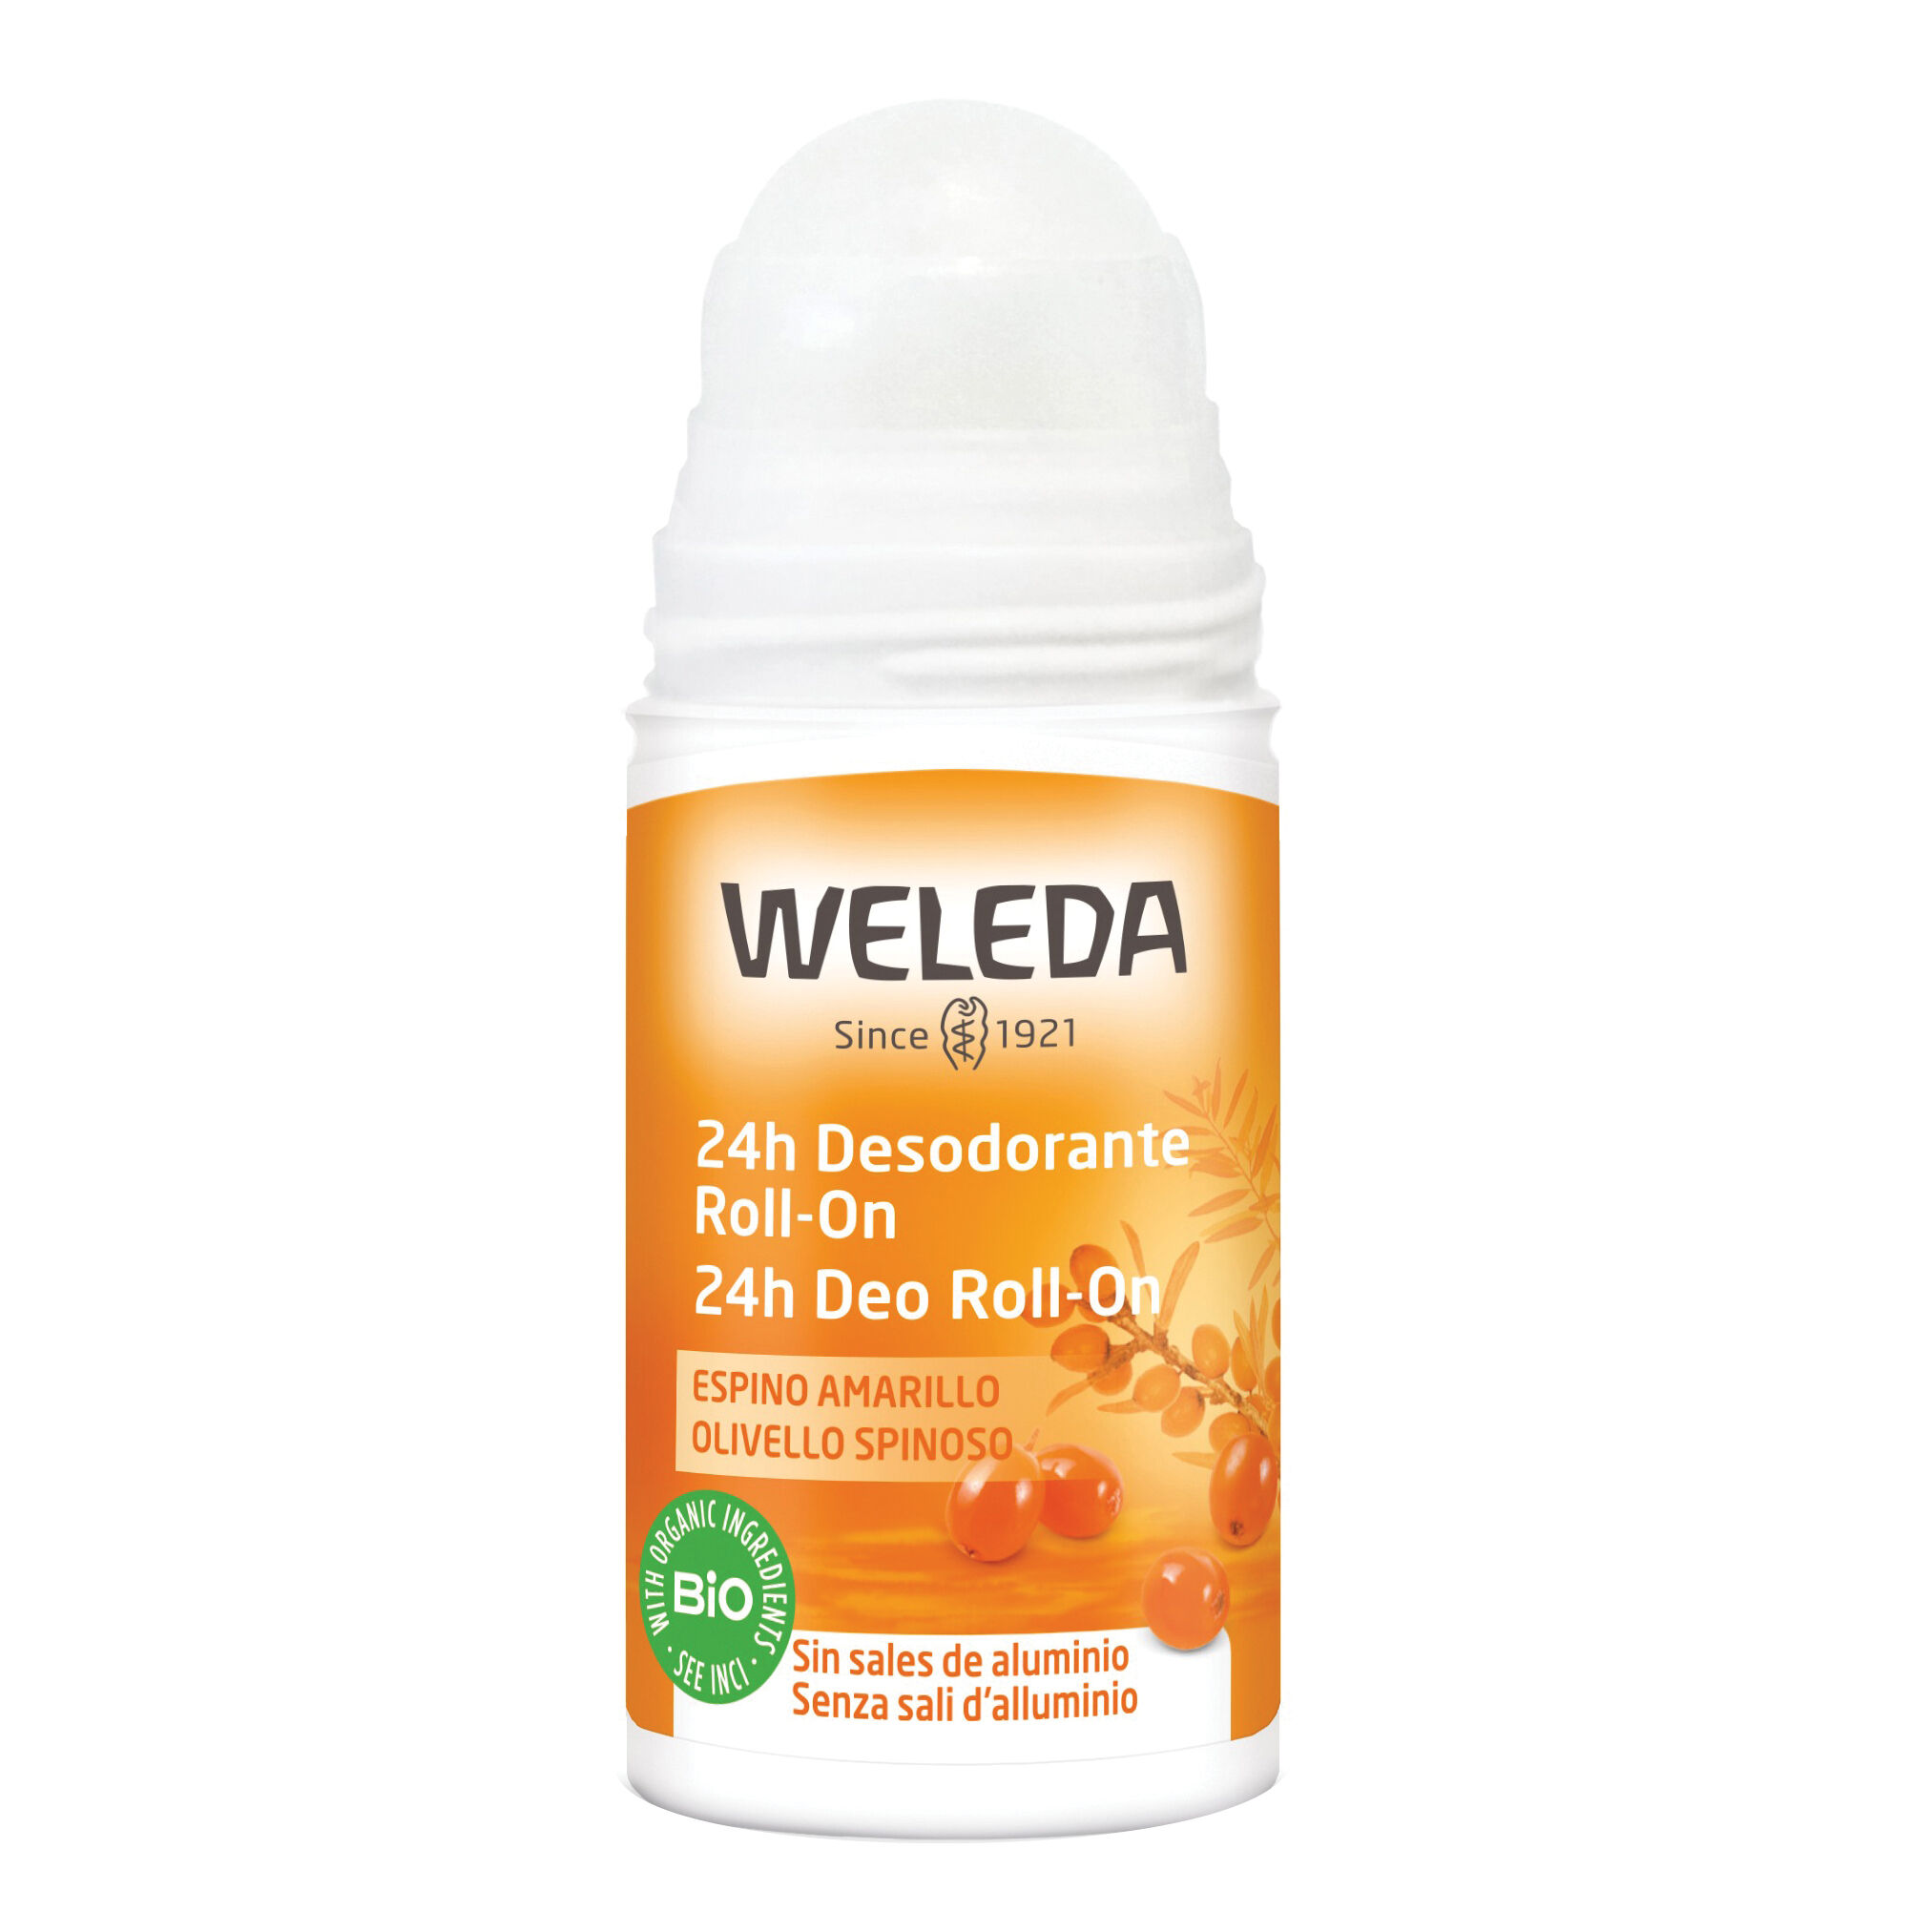 Weleda 24h deo roll-on olivello spinoso 50 ml